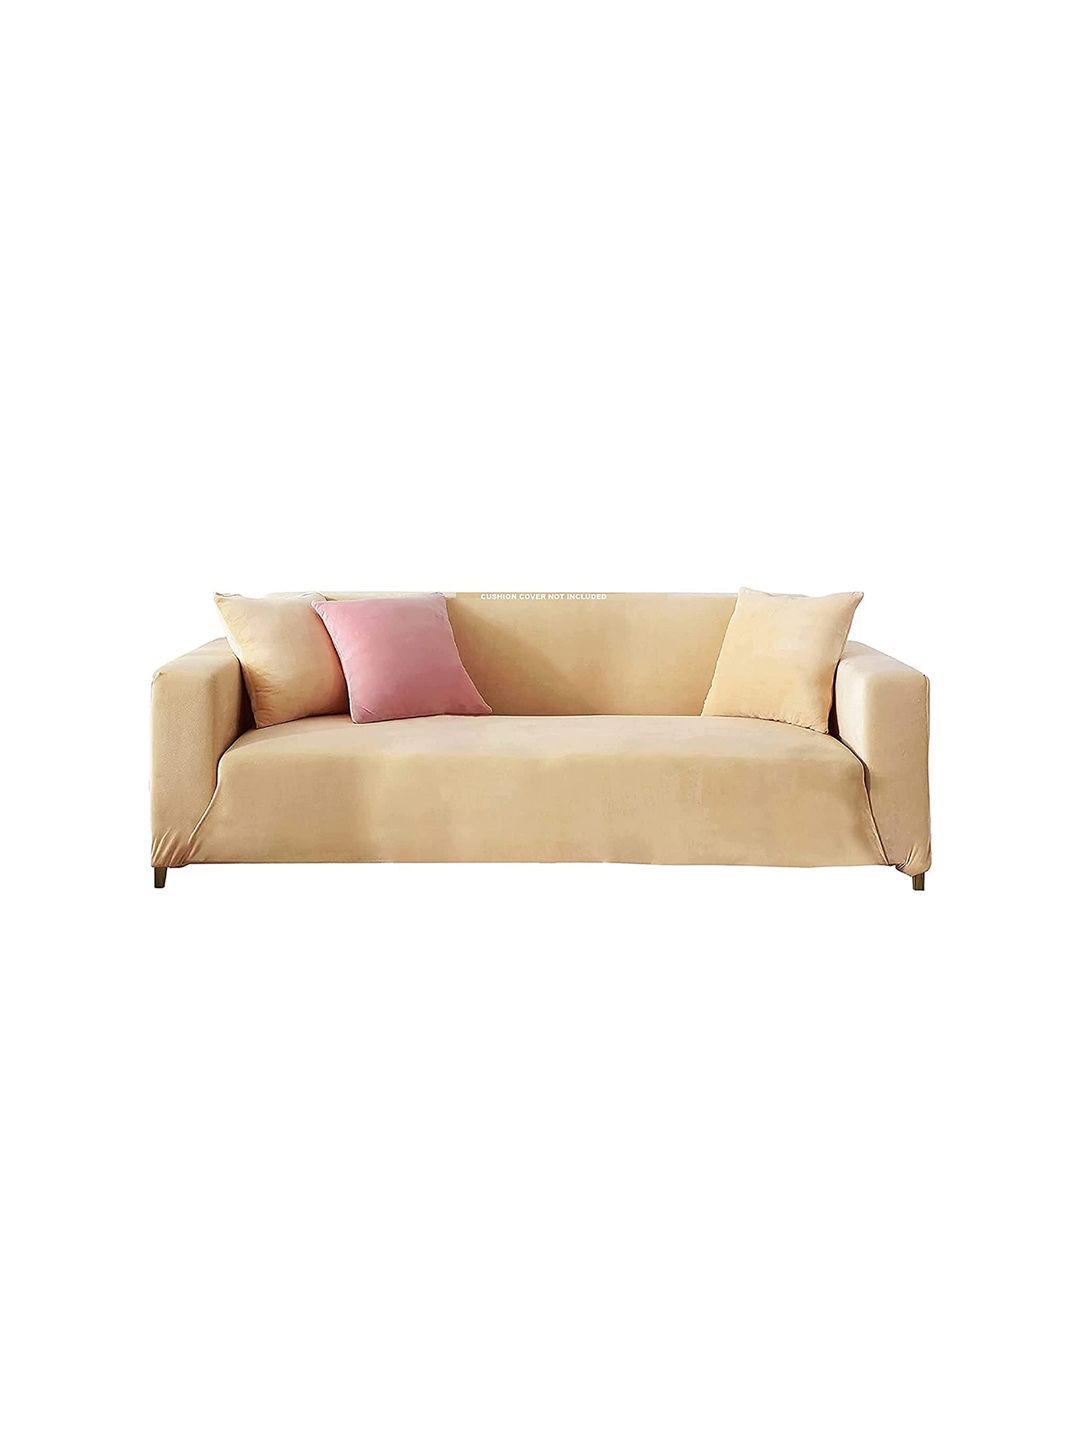 HOUSE OF QUIRK Solid Sofa Covers Price in India